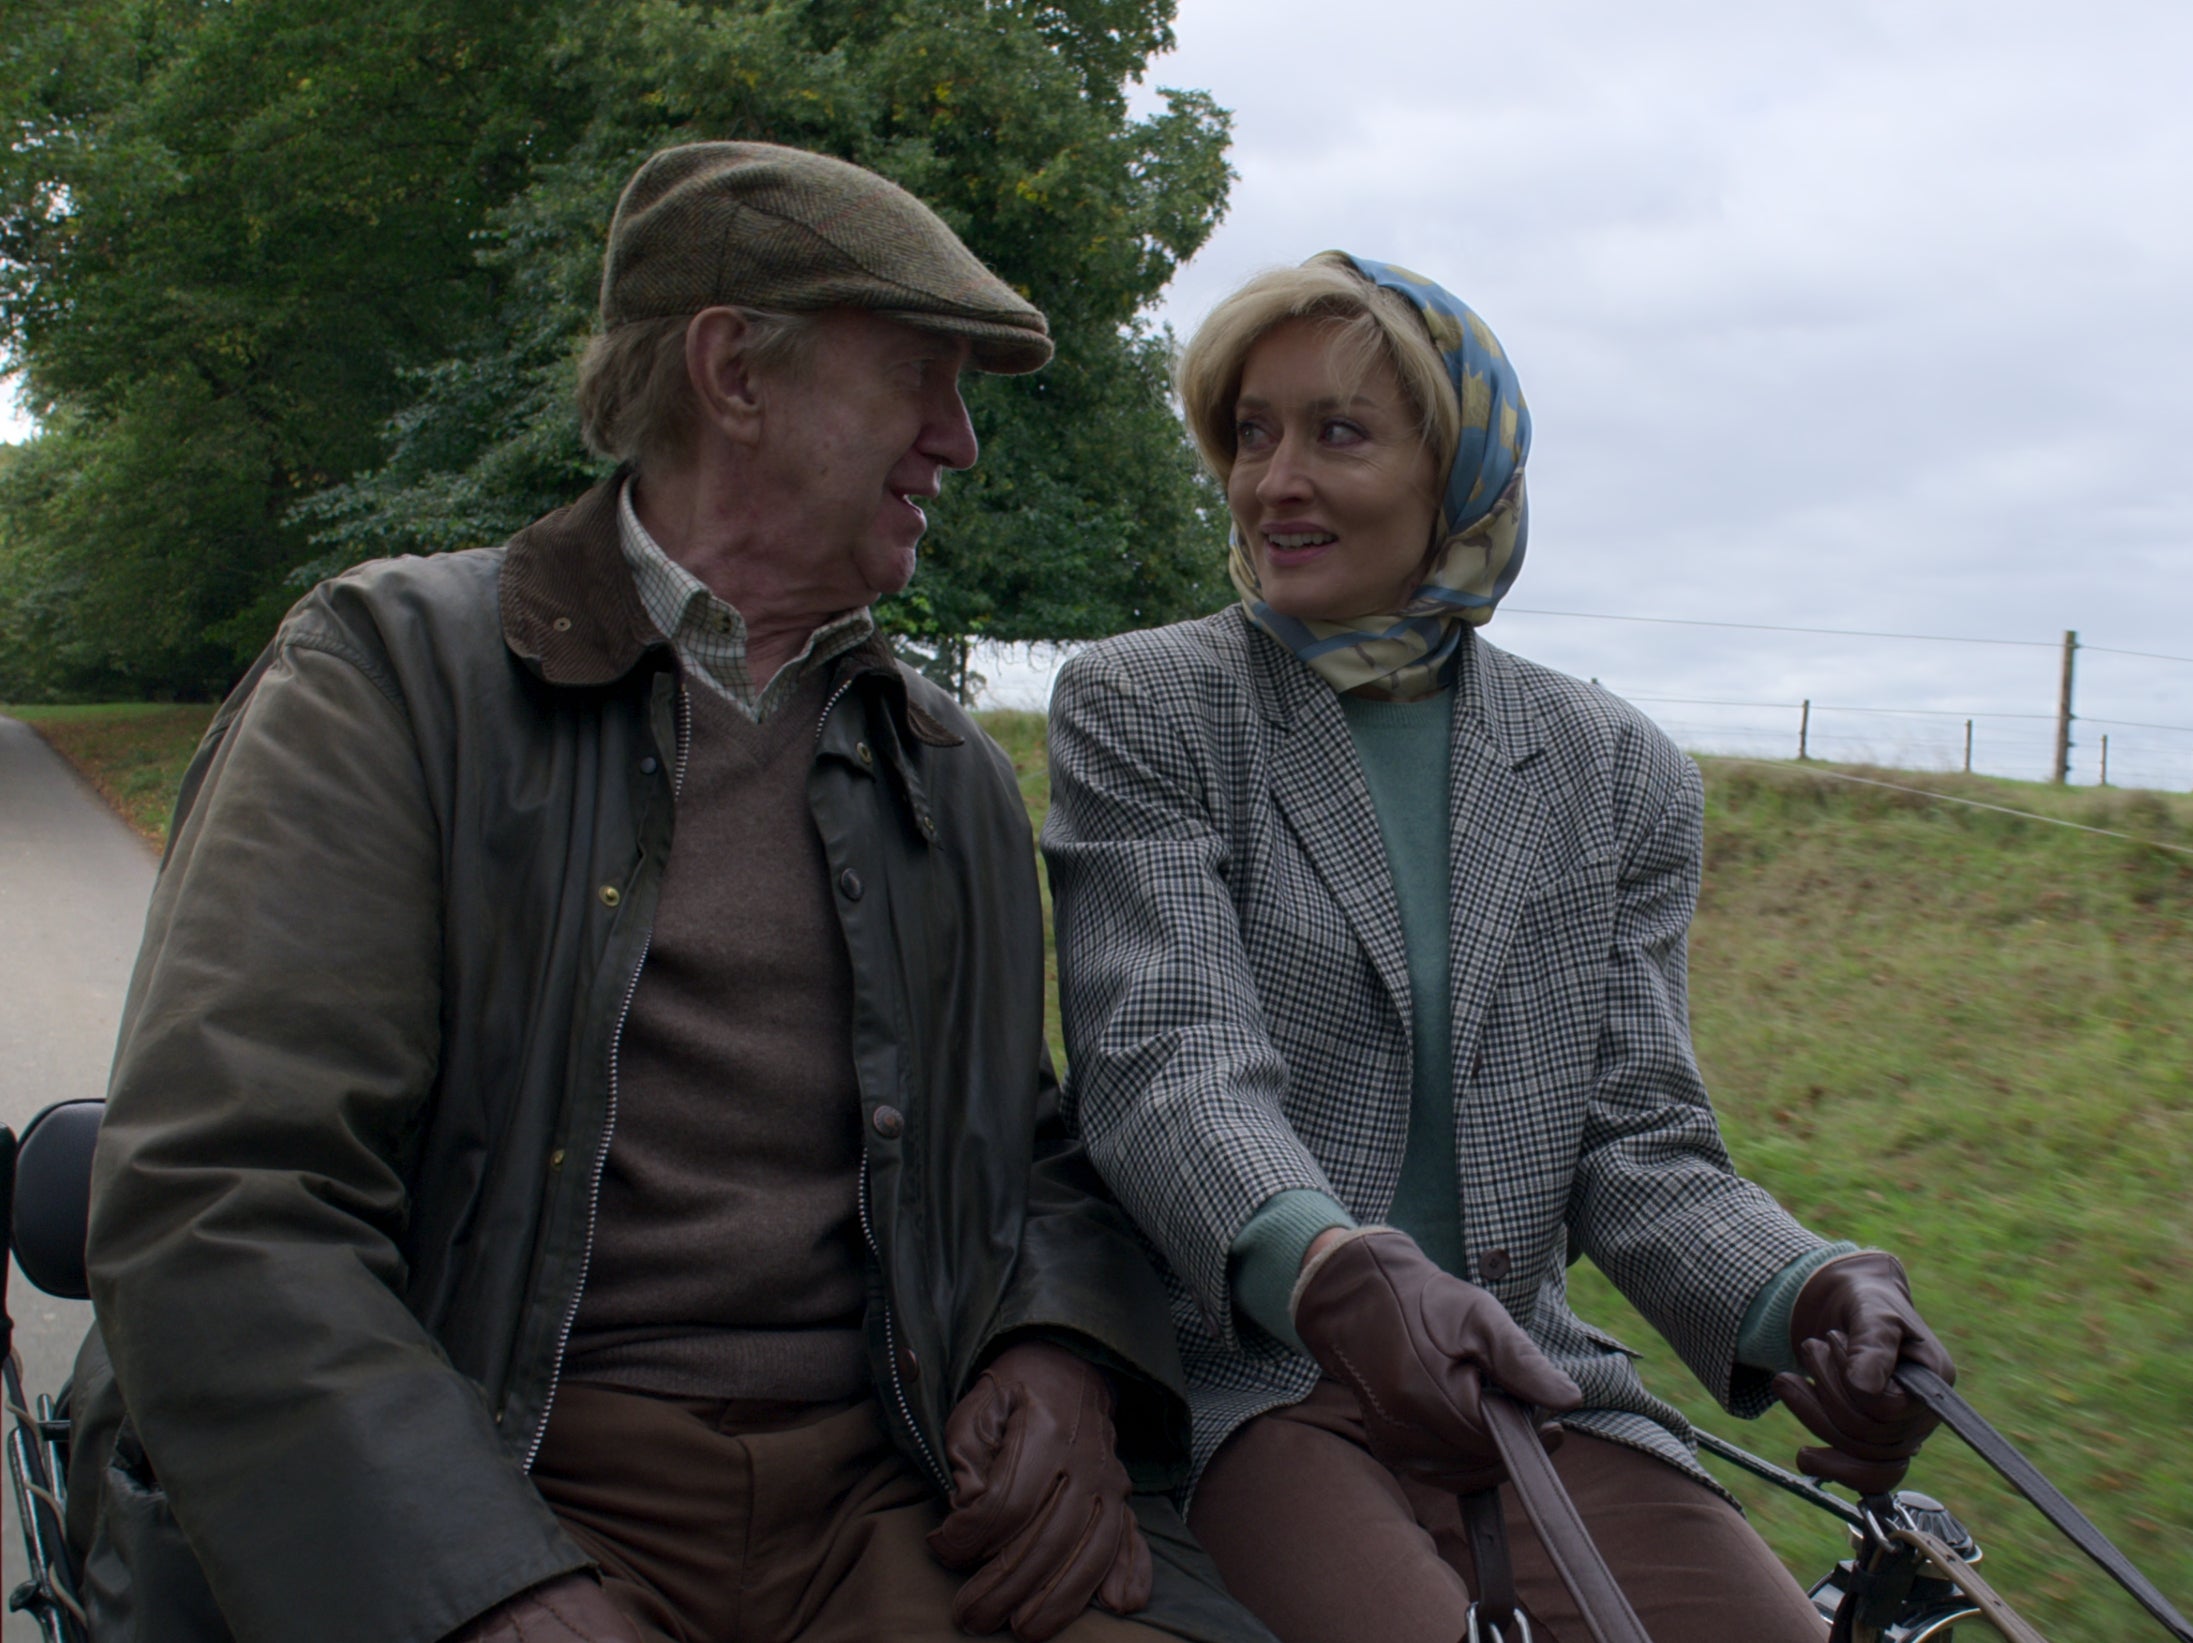 A royal carriage: Jonathan Pryce and Natascha McElhone in ‘The Crown’